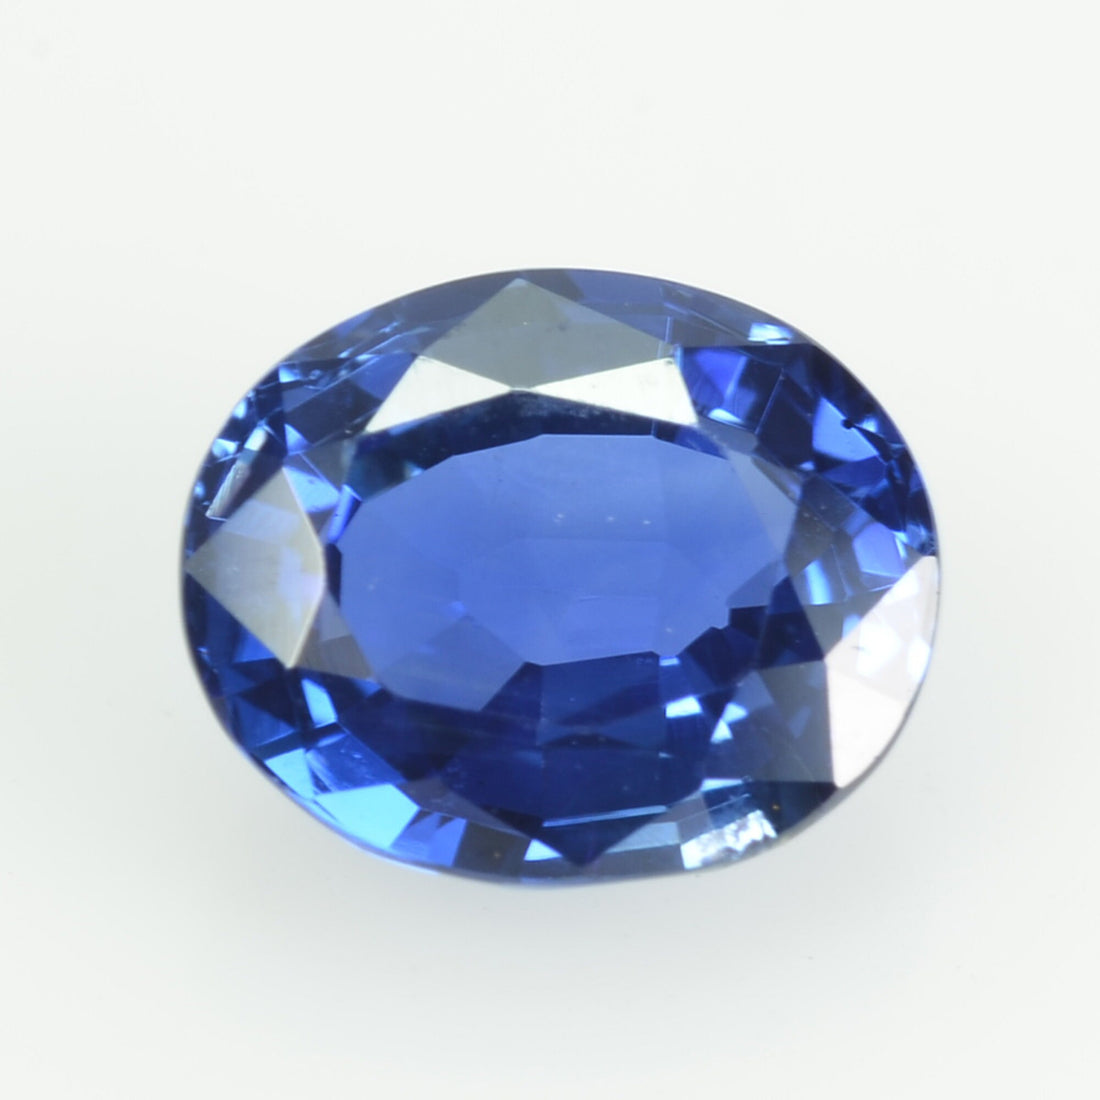 1.30 cts natural blue sapphire loose gemstone oval cut AGL Certified